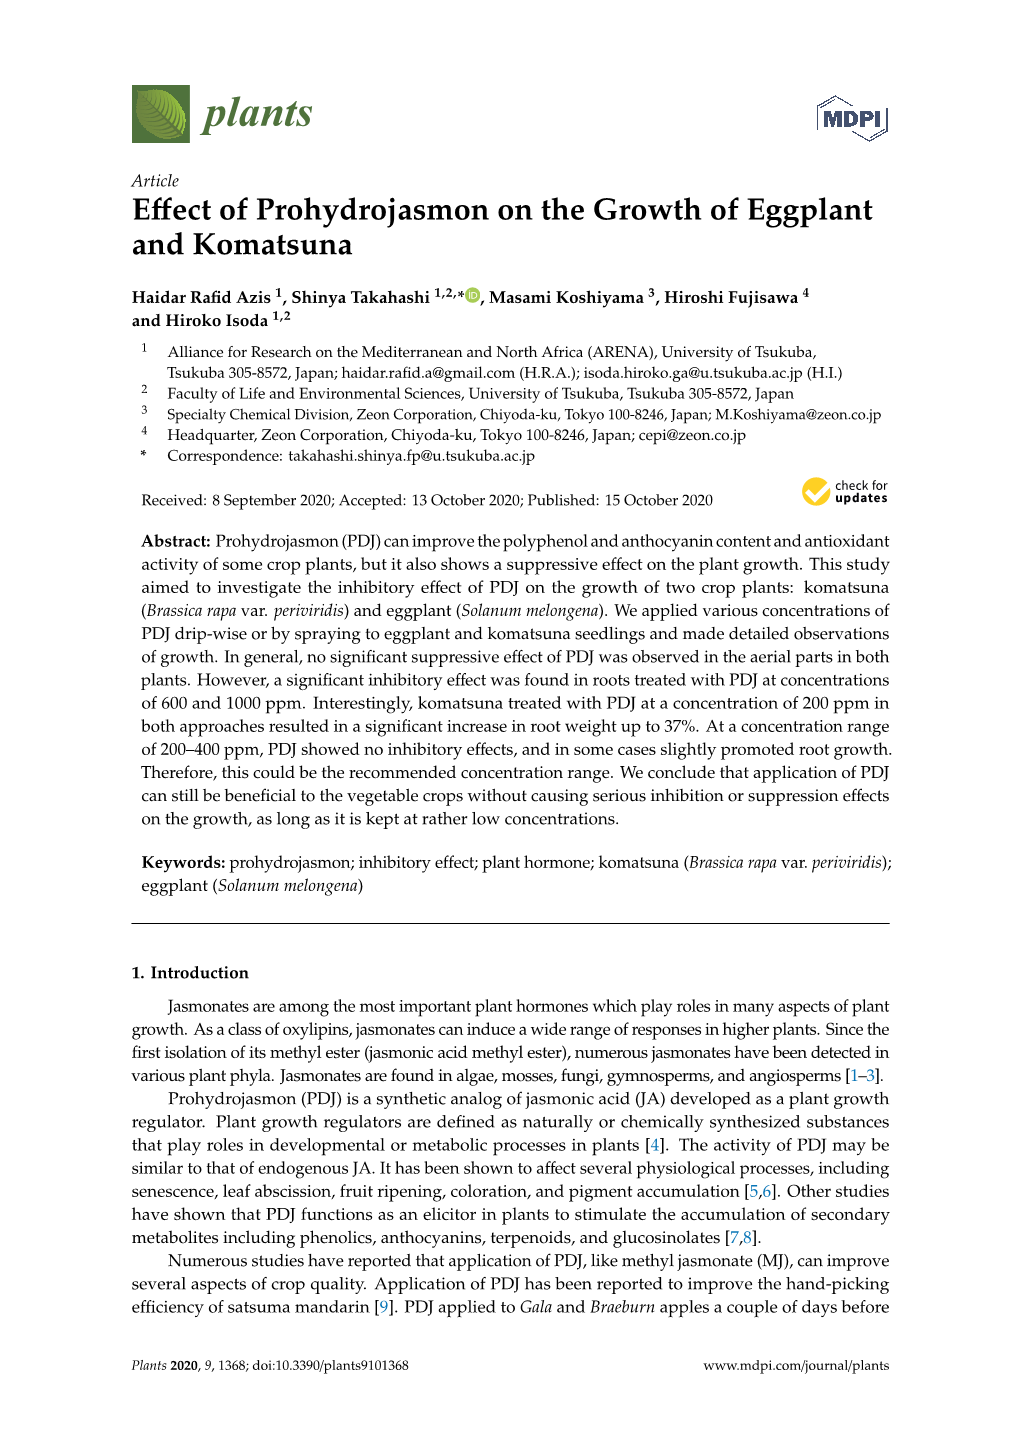 Effect of Prohydrojasmon on the Growth of Eggplant and Komatsuna